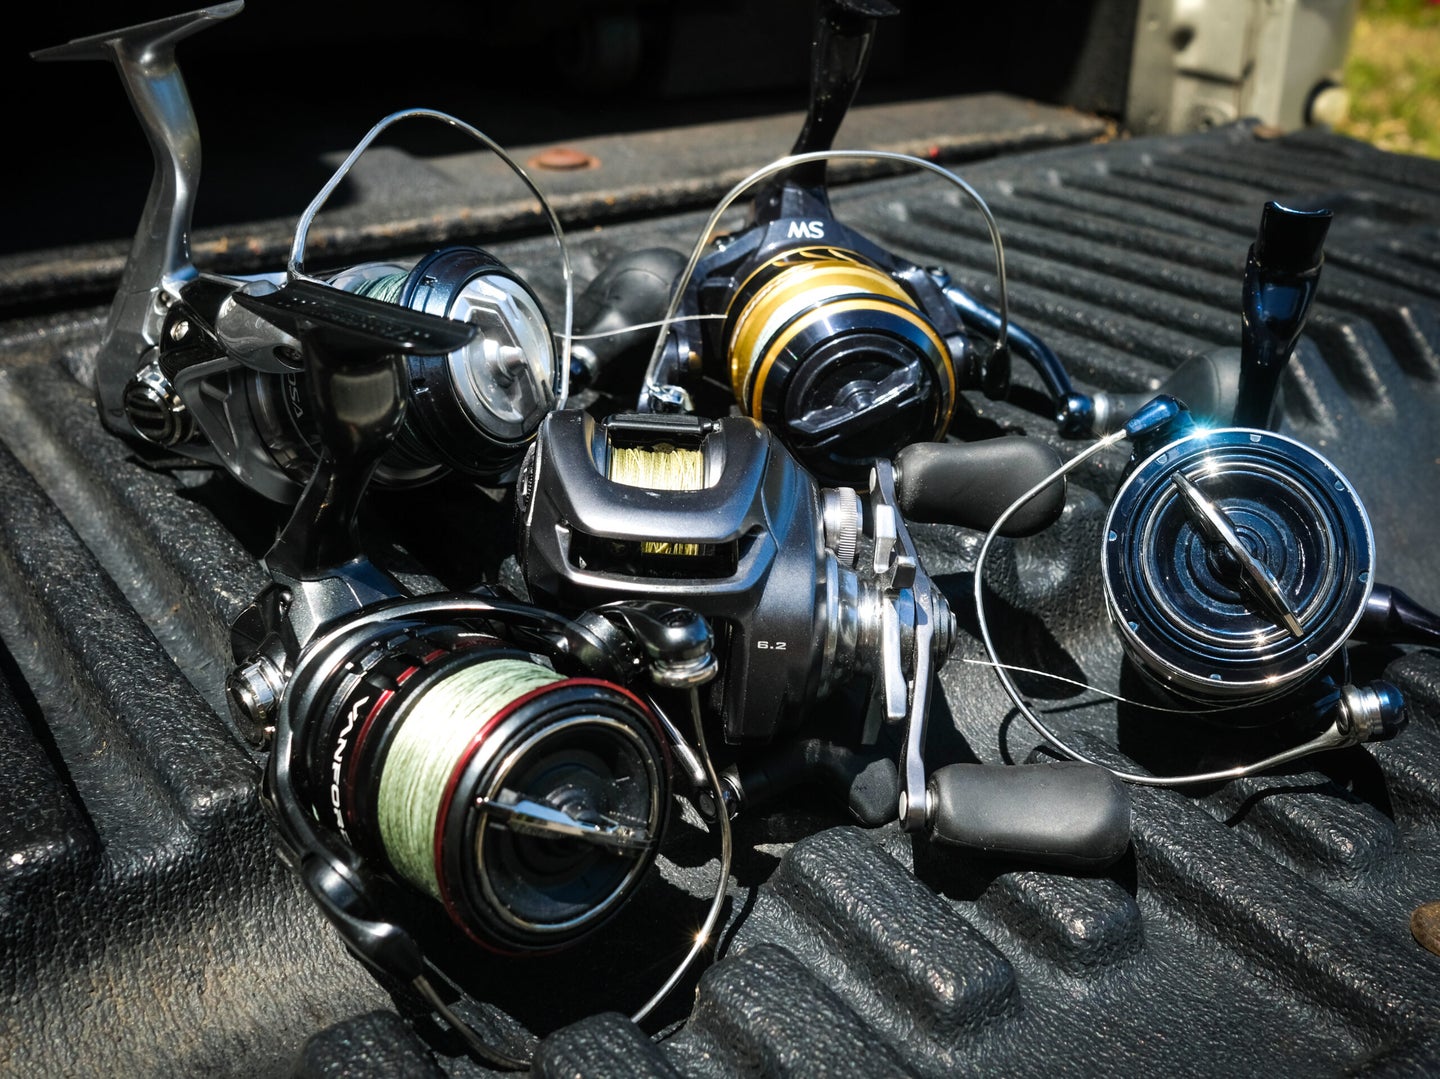 Best items and accessories for those looking for shimano twin